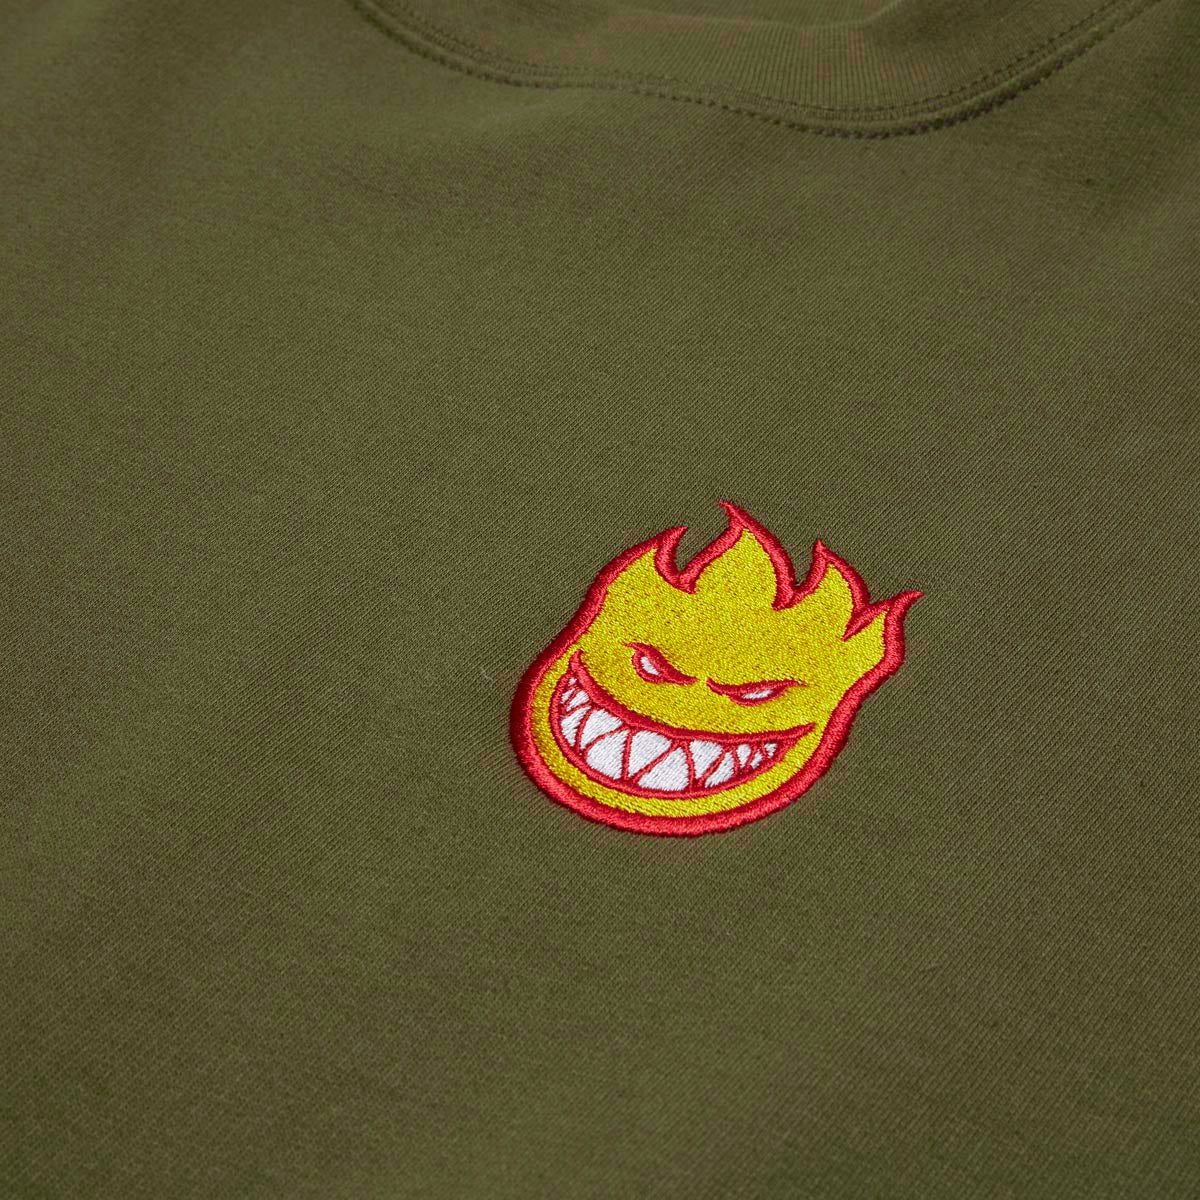 Spitfire Lil Bighead Fill Sweatshirt - Army/Red/Gold/White image 2